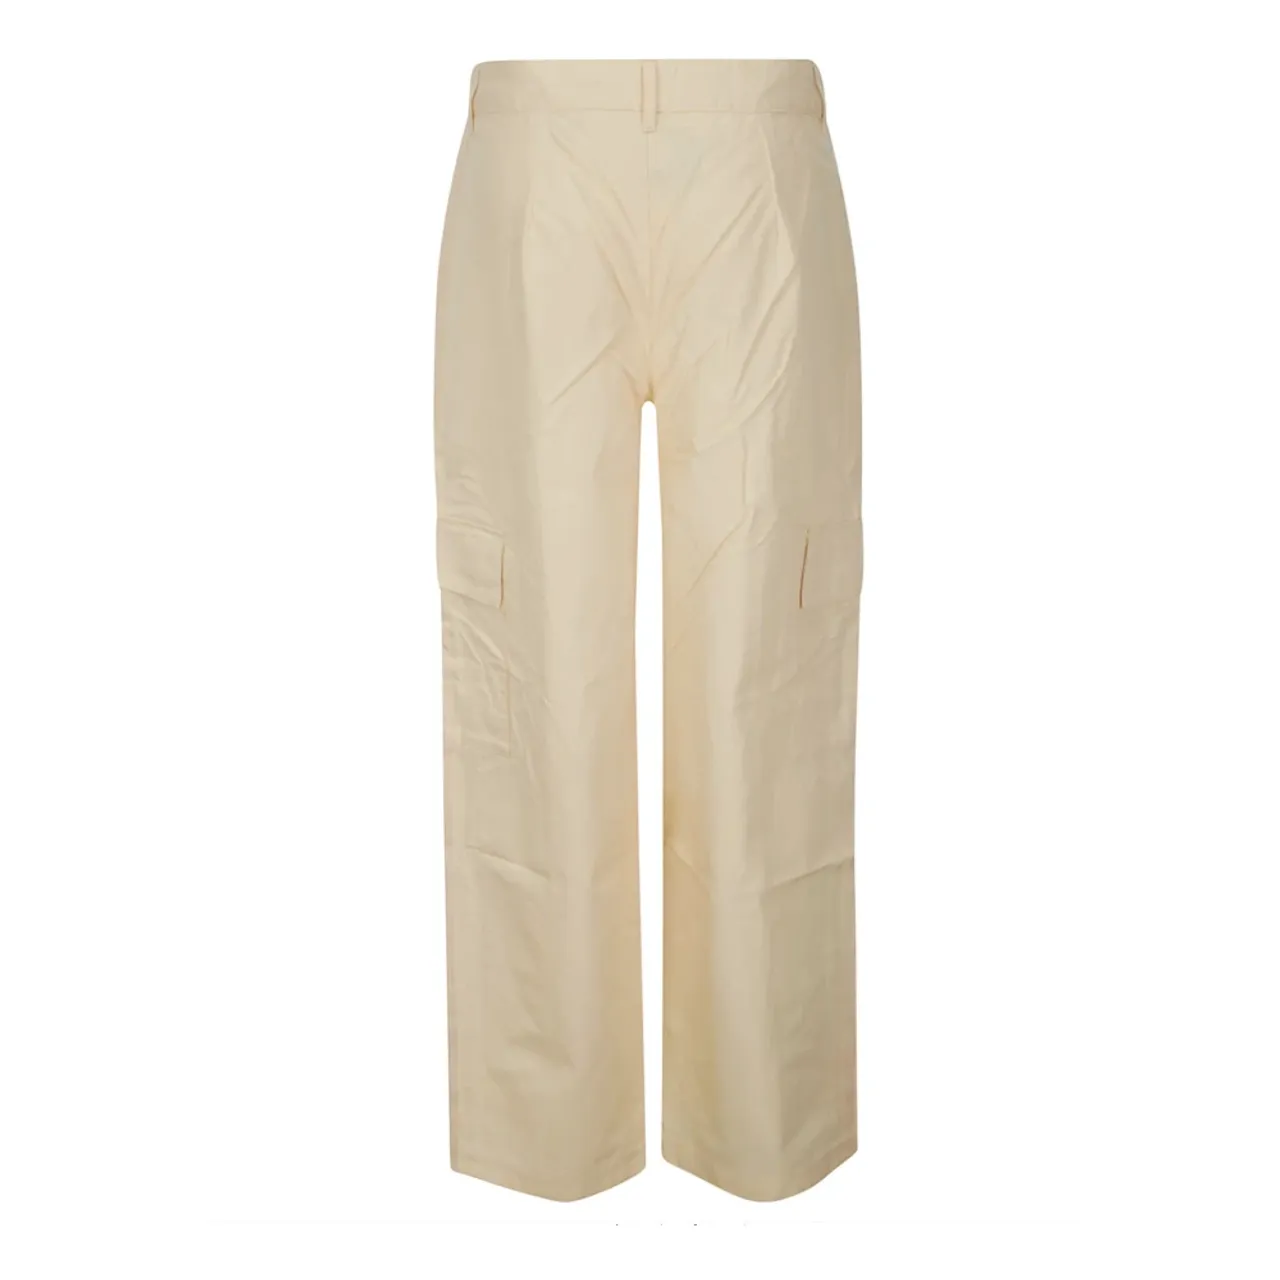 Adidas Originals , Beige Cotton Cargo Trousers with Side Pockets ,Beige male, Sizes: